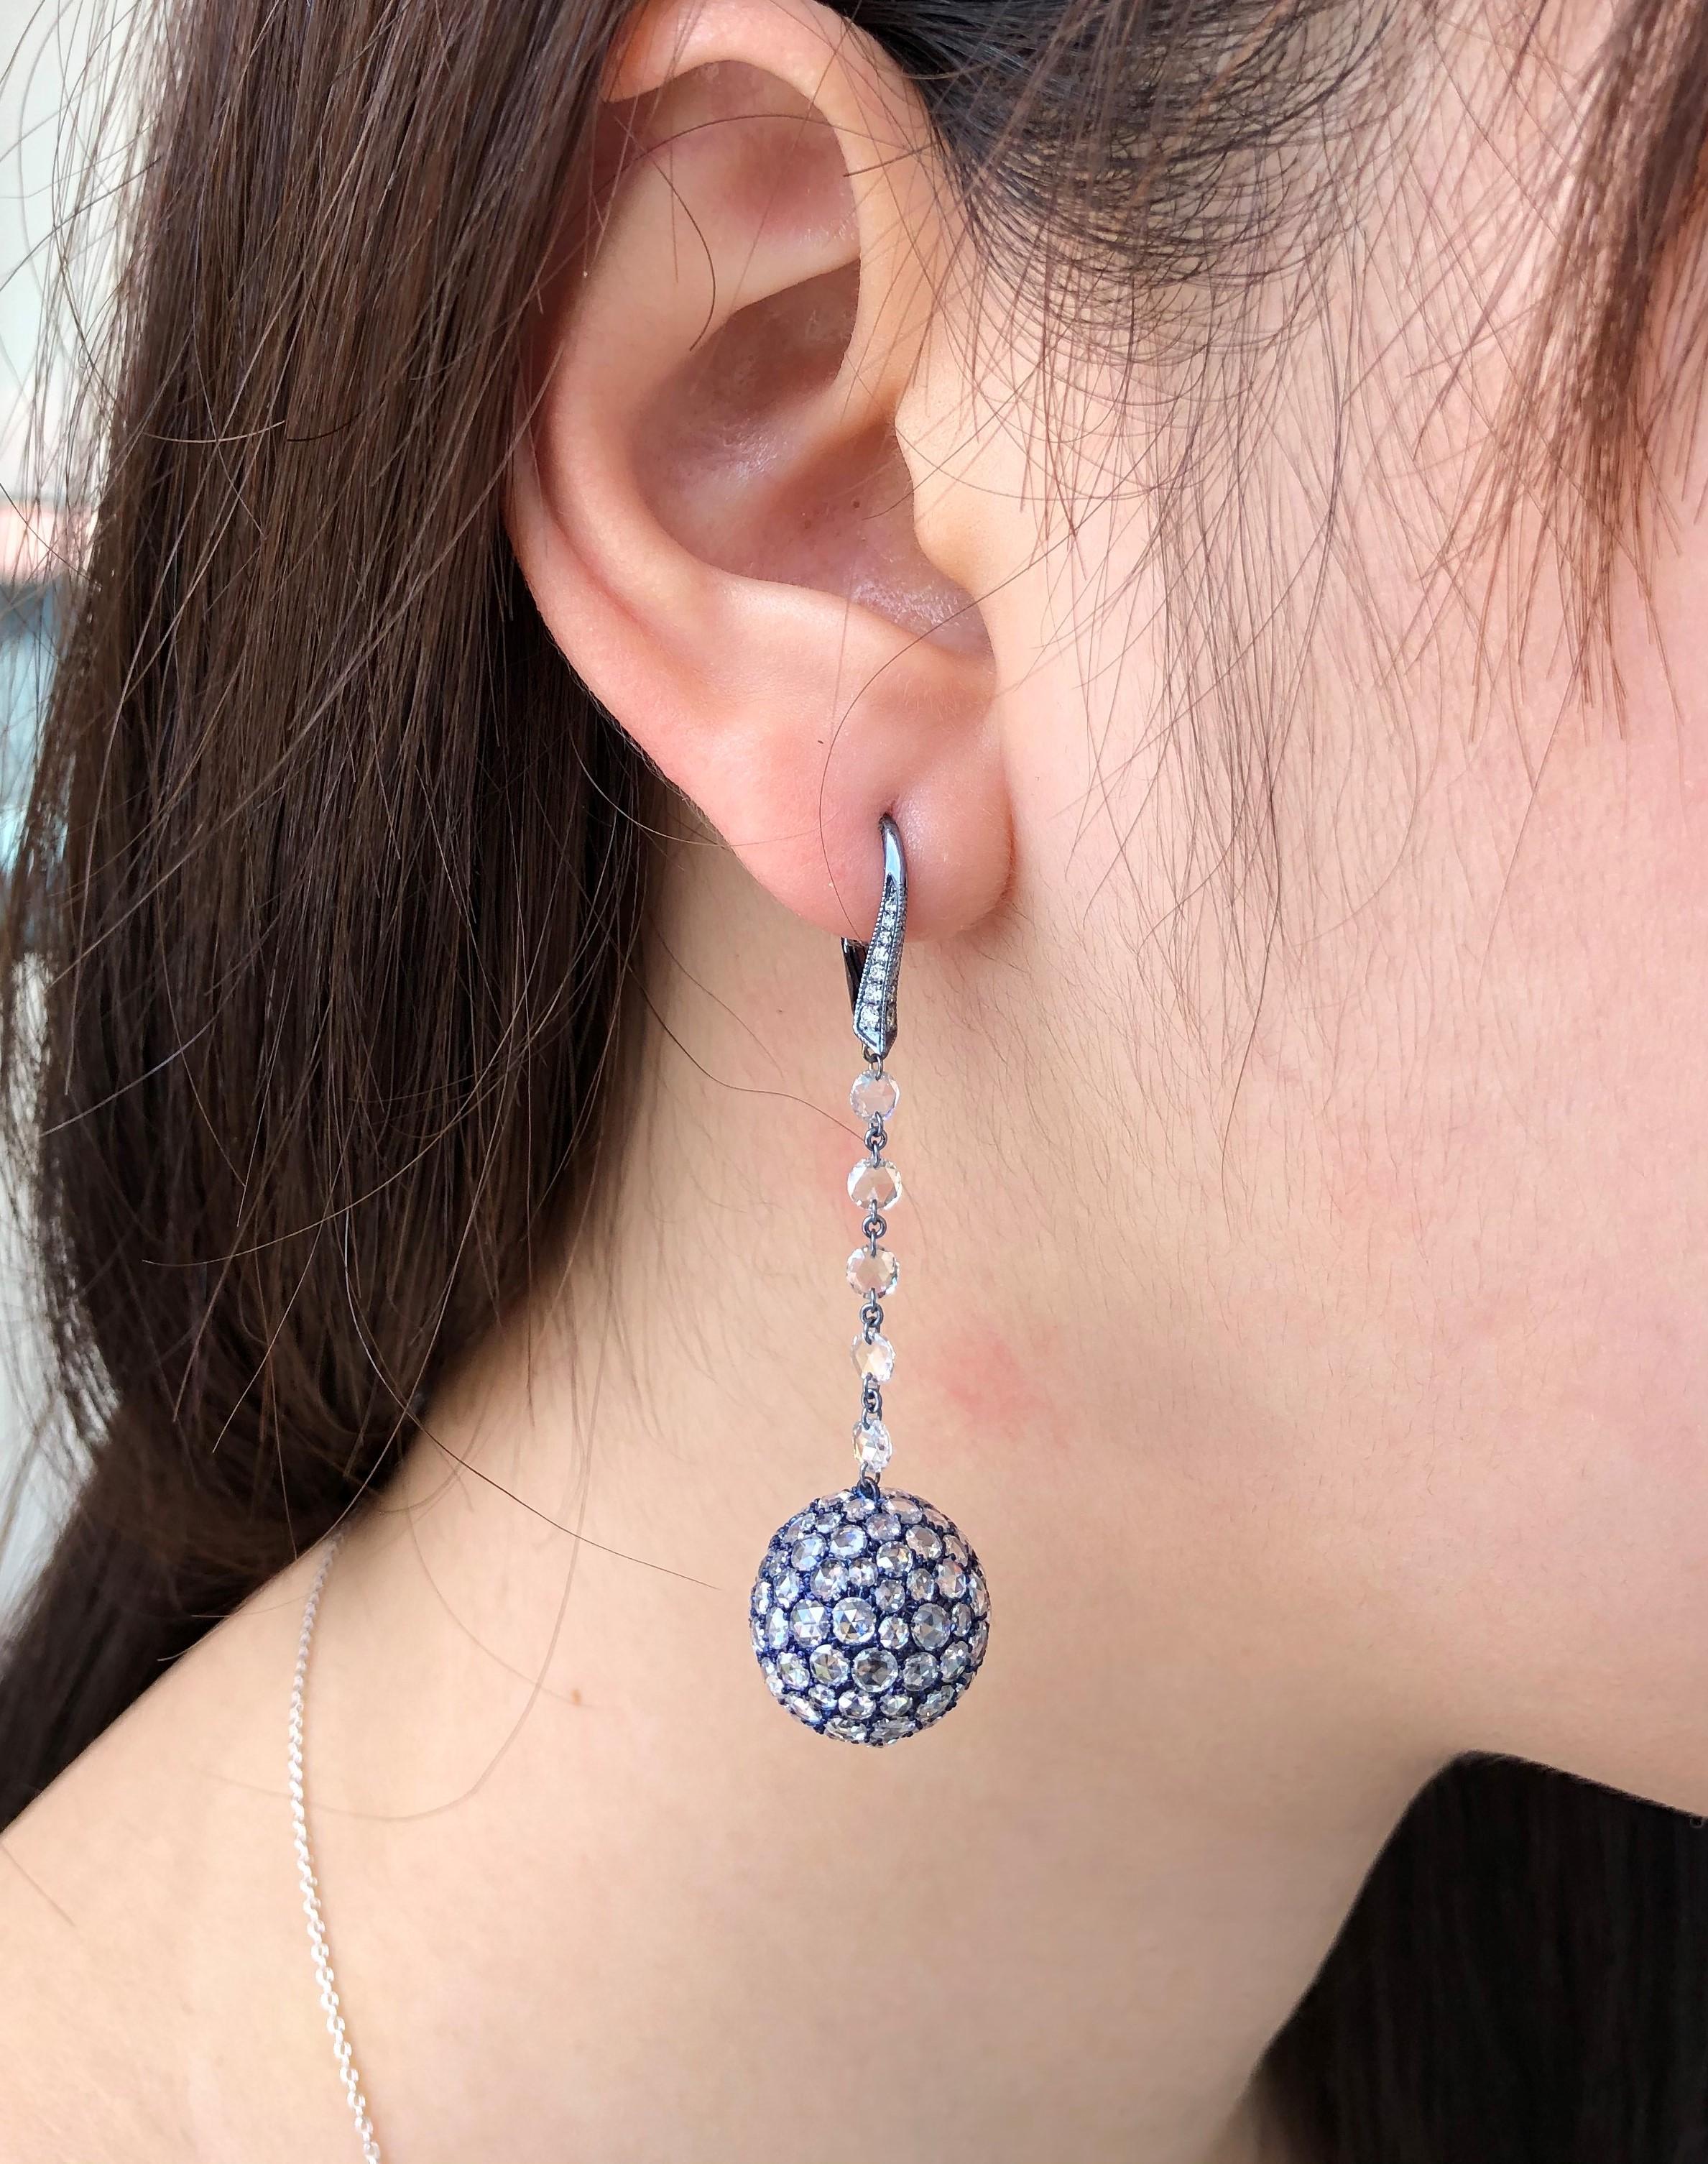 JR 7.82 carats Diamond Briolette Titanium Earring

This distinct dangling ball earring is a pleasant sight to the eyes. It oozes out contemporary craftsmanship and features titanium along with white rose cut diamonds.

Diamond Weight : 9.73